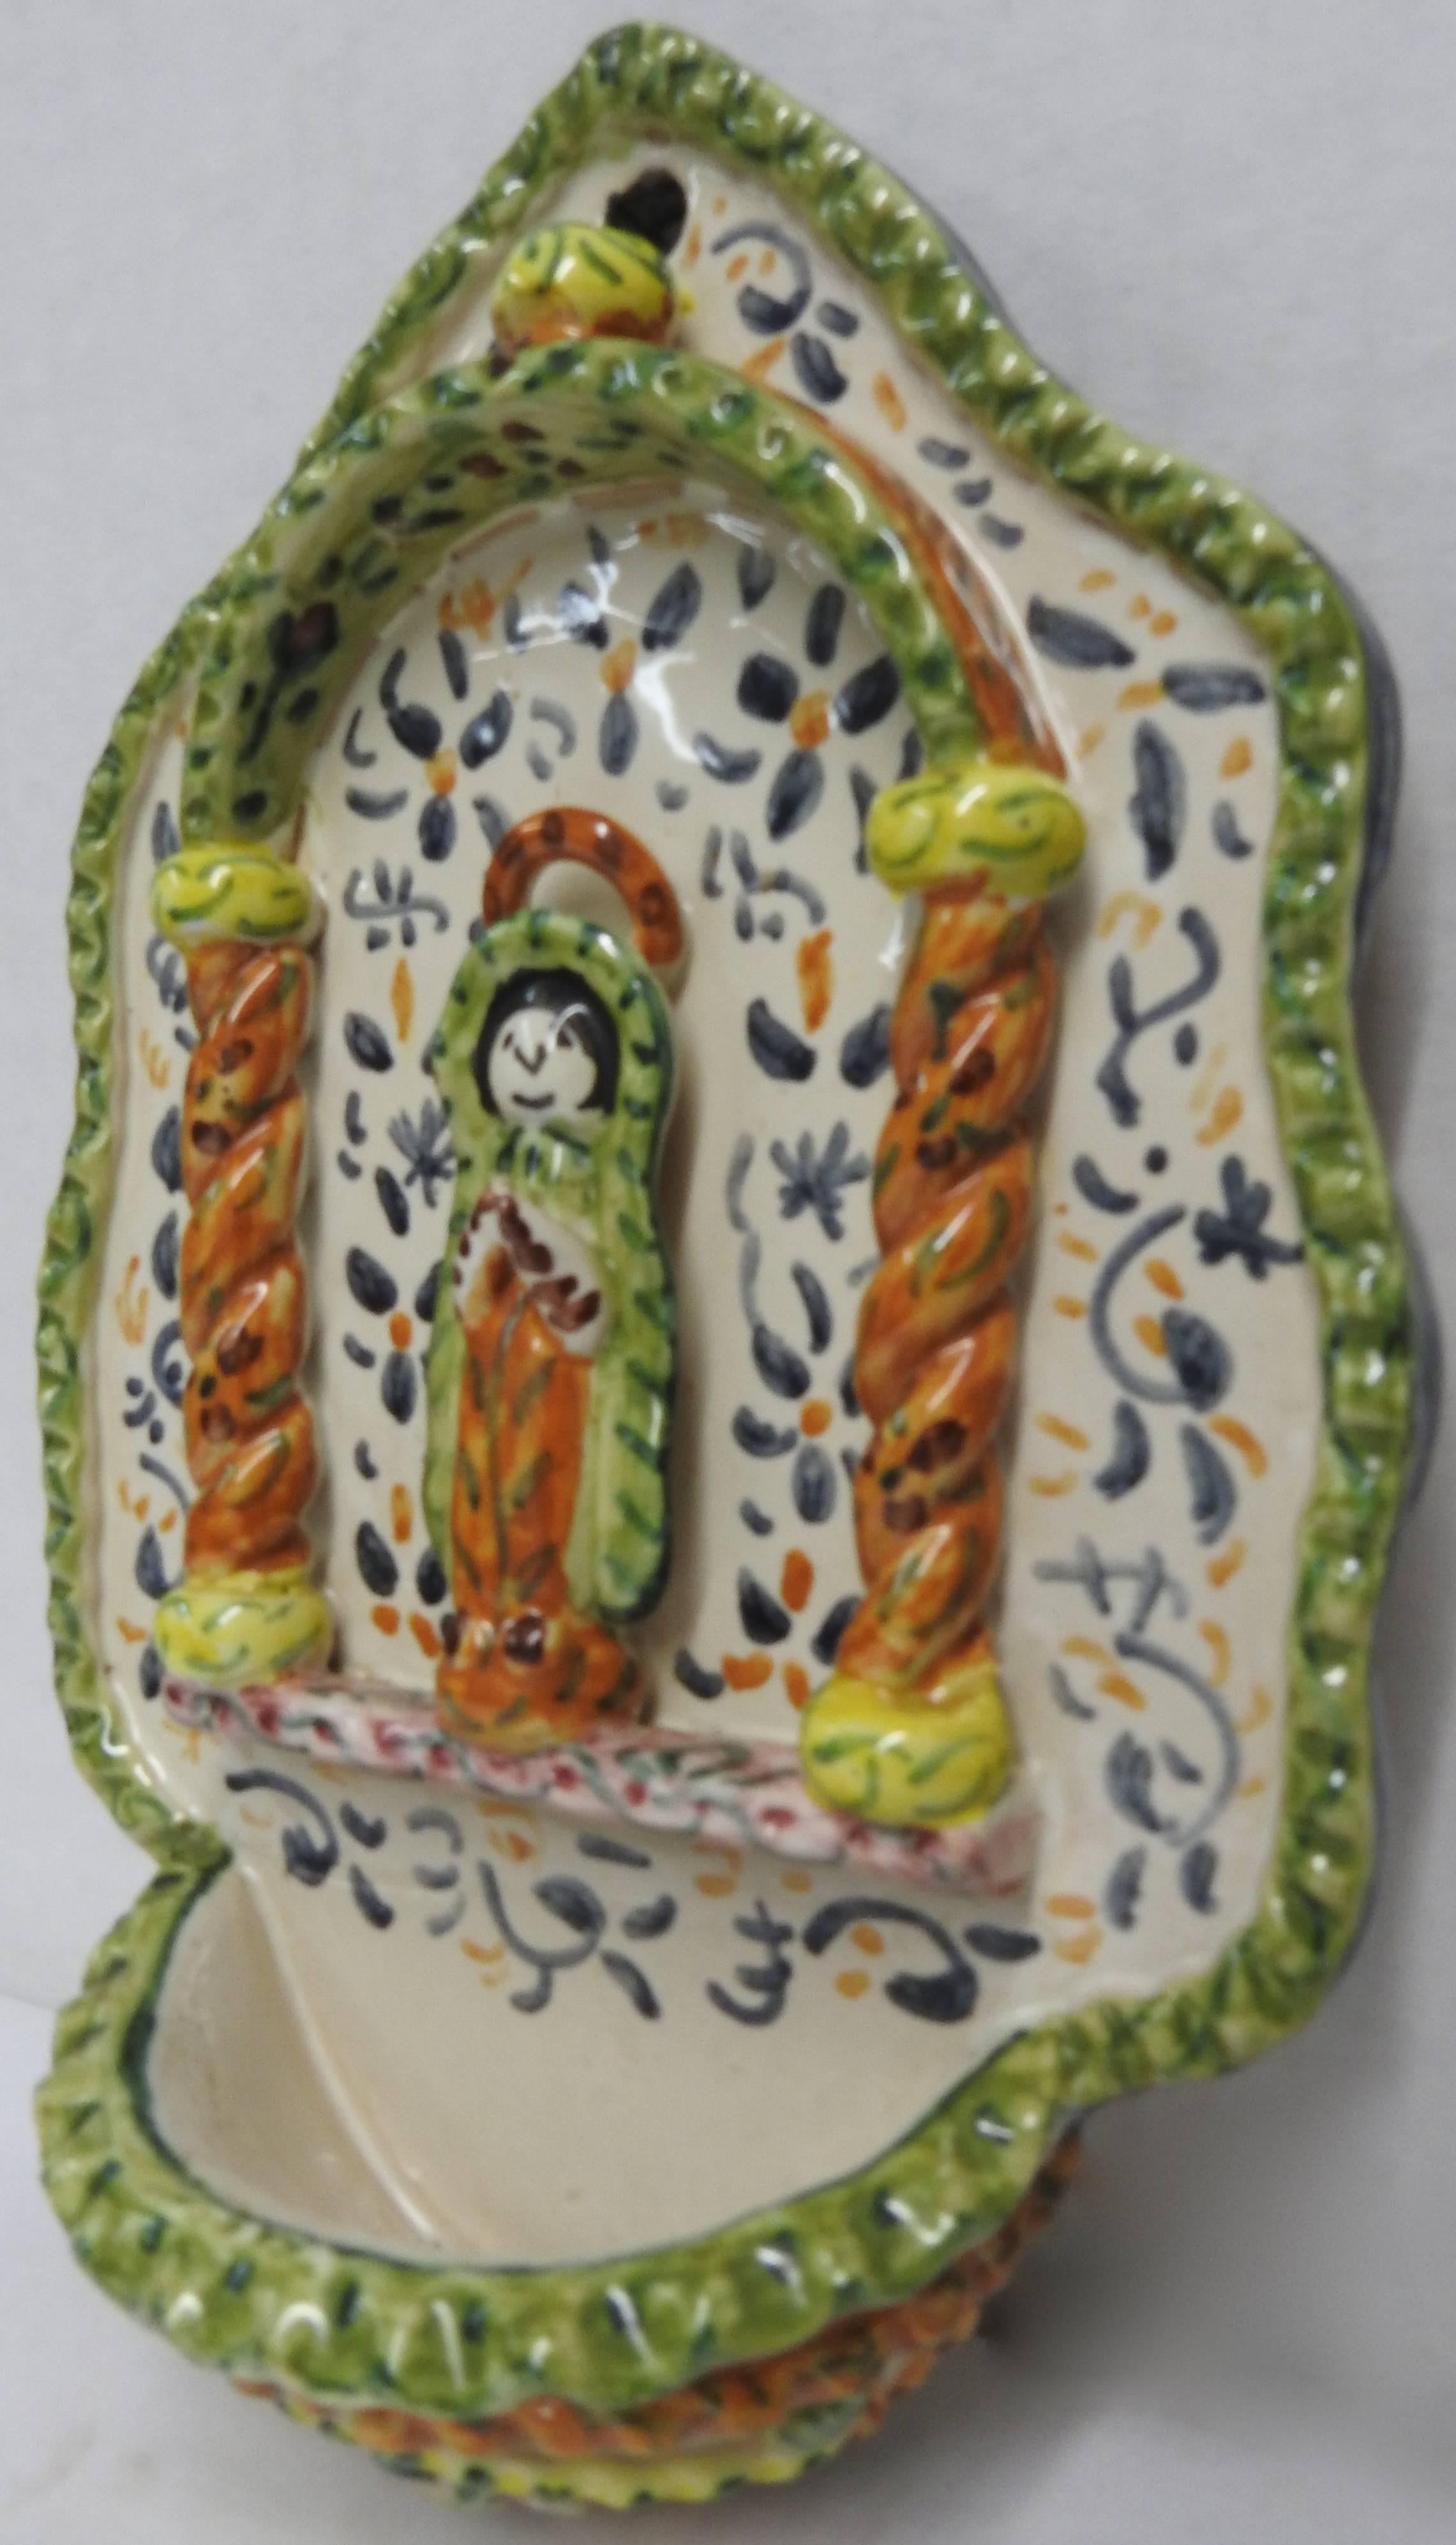 A simple angel stands in the center of this hand painted ceramic Holy water font. The angel is surrounded by a variety of lovely colors. The Artist-signed the piece on the inside of the font.